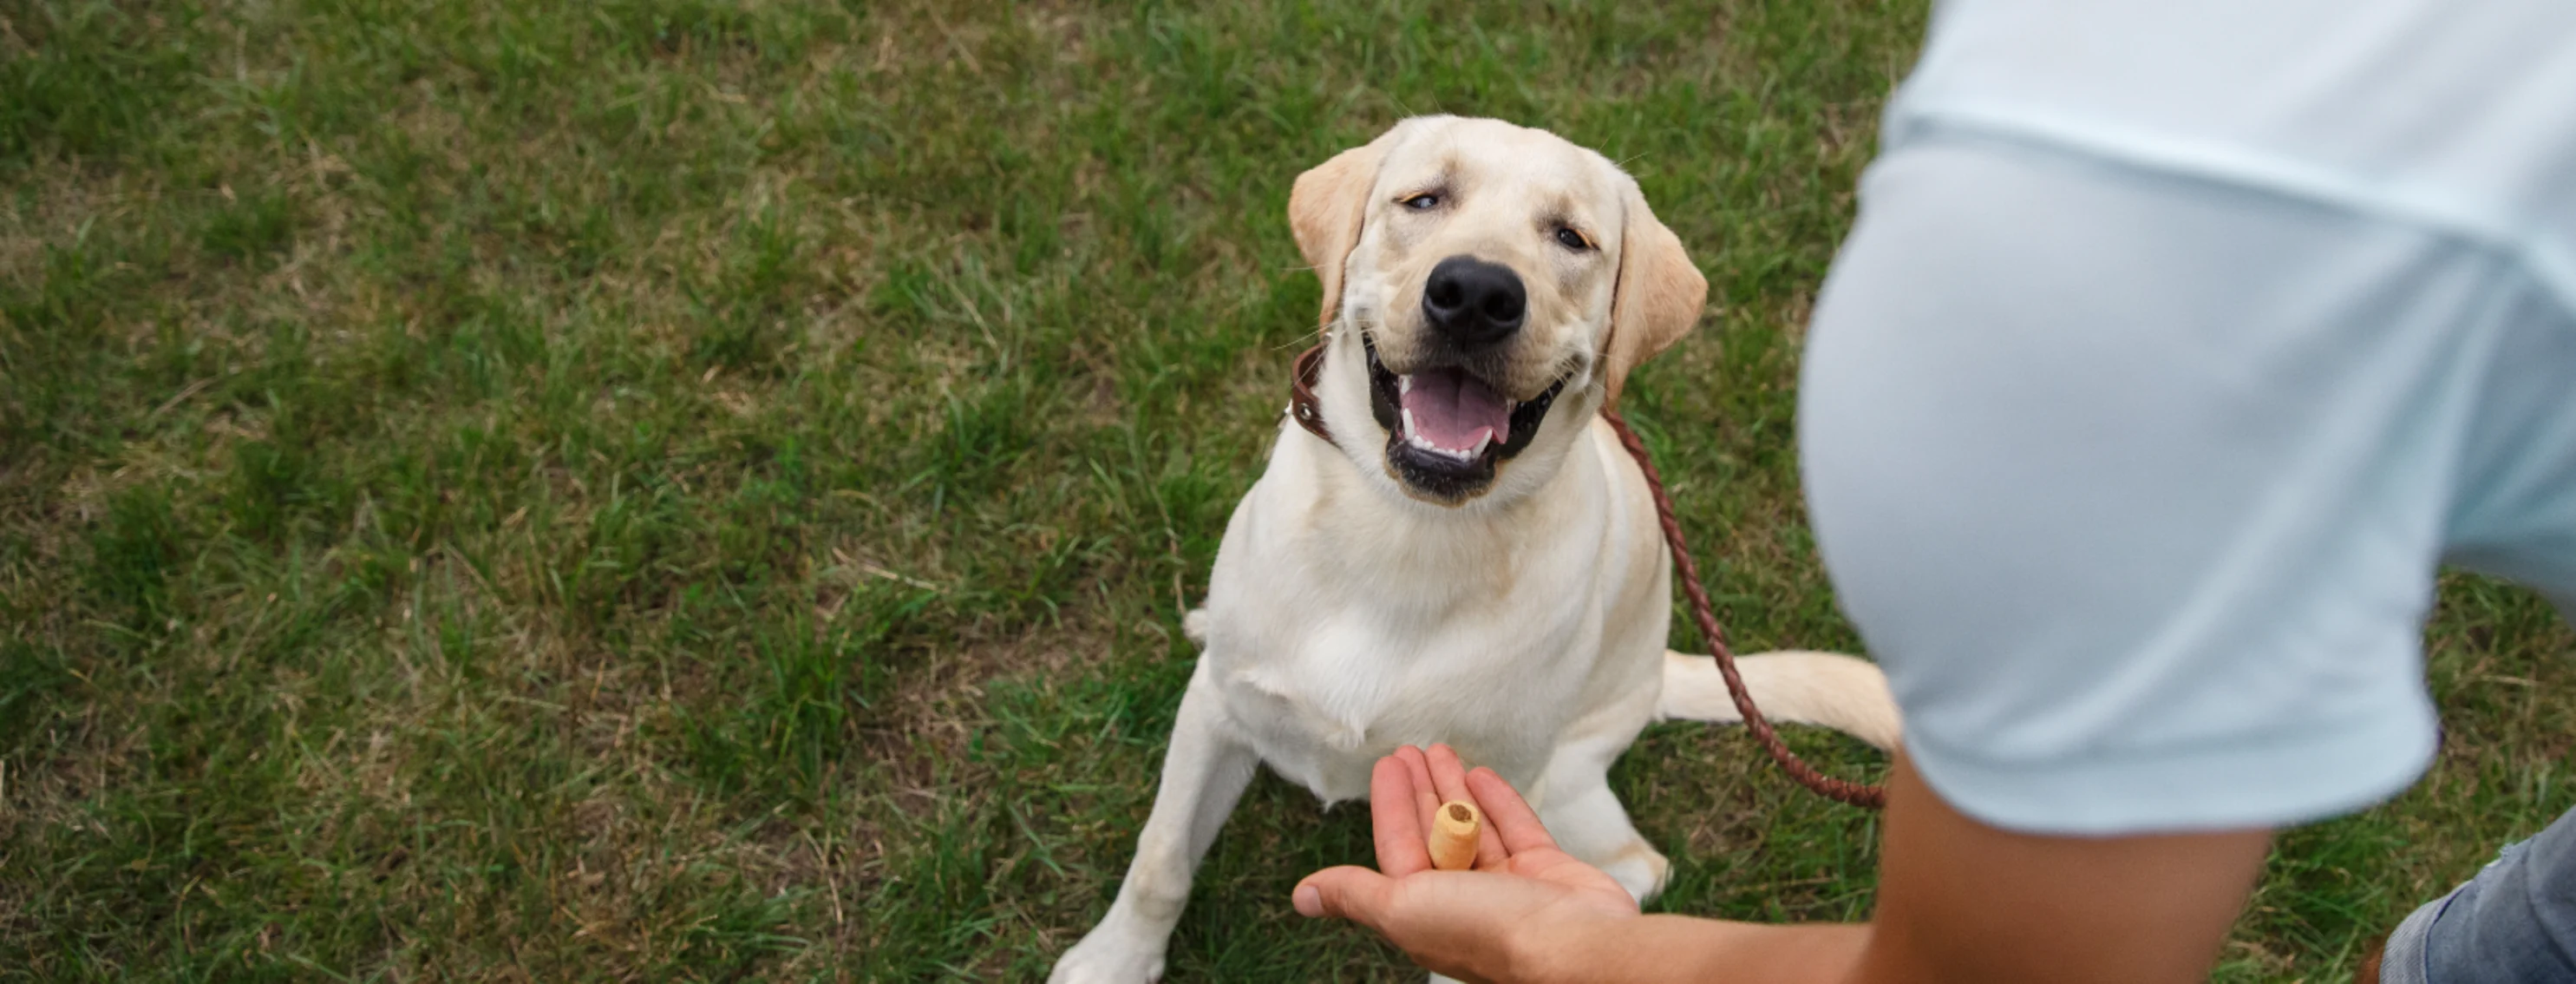 Dog smiling while human offers a treat